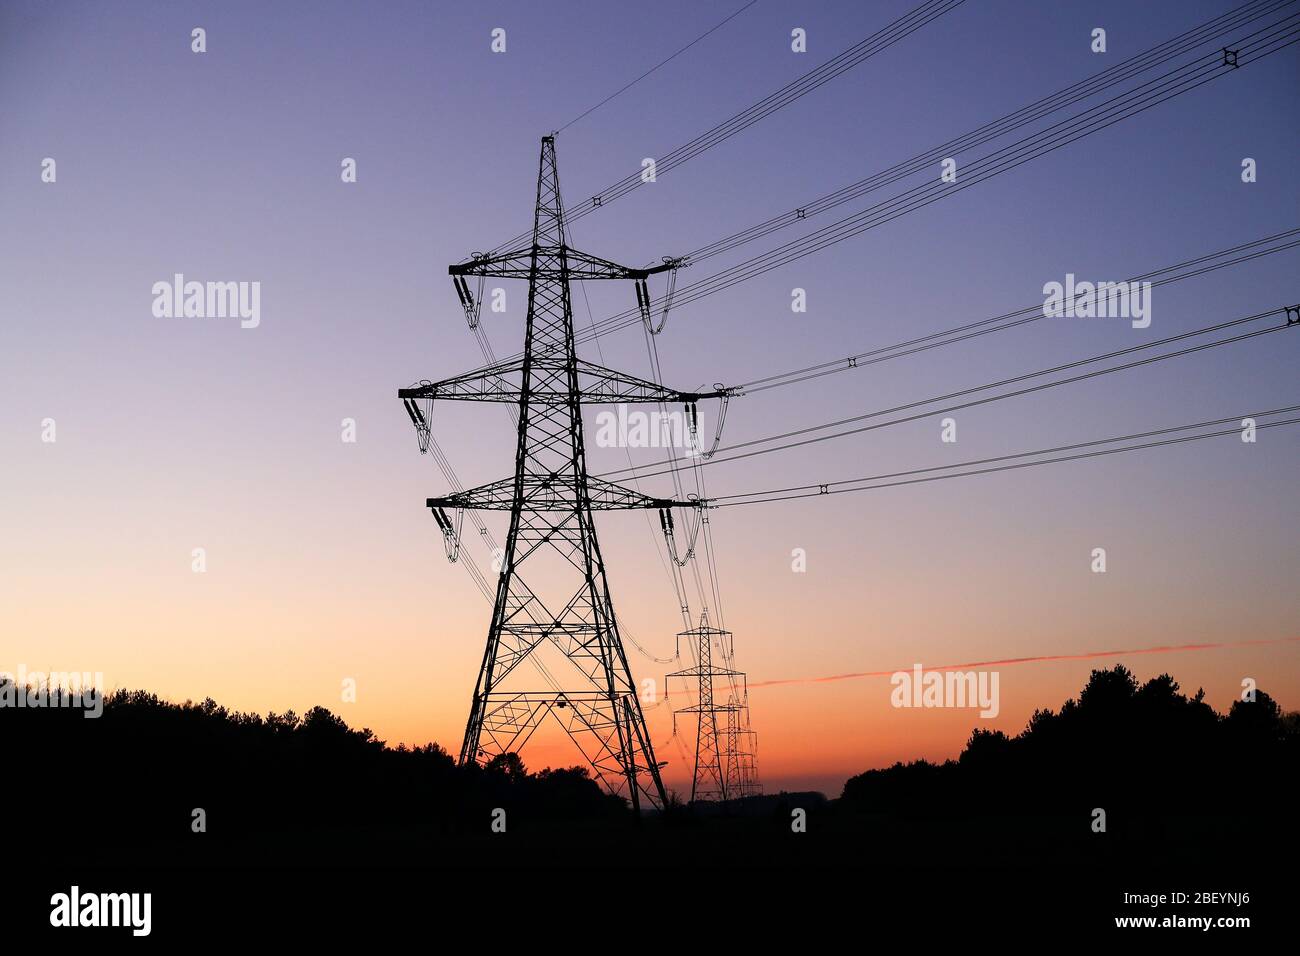 Row of electricity pylons at sunset. Stock Photo